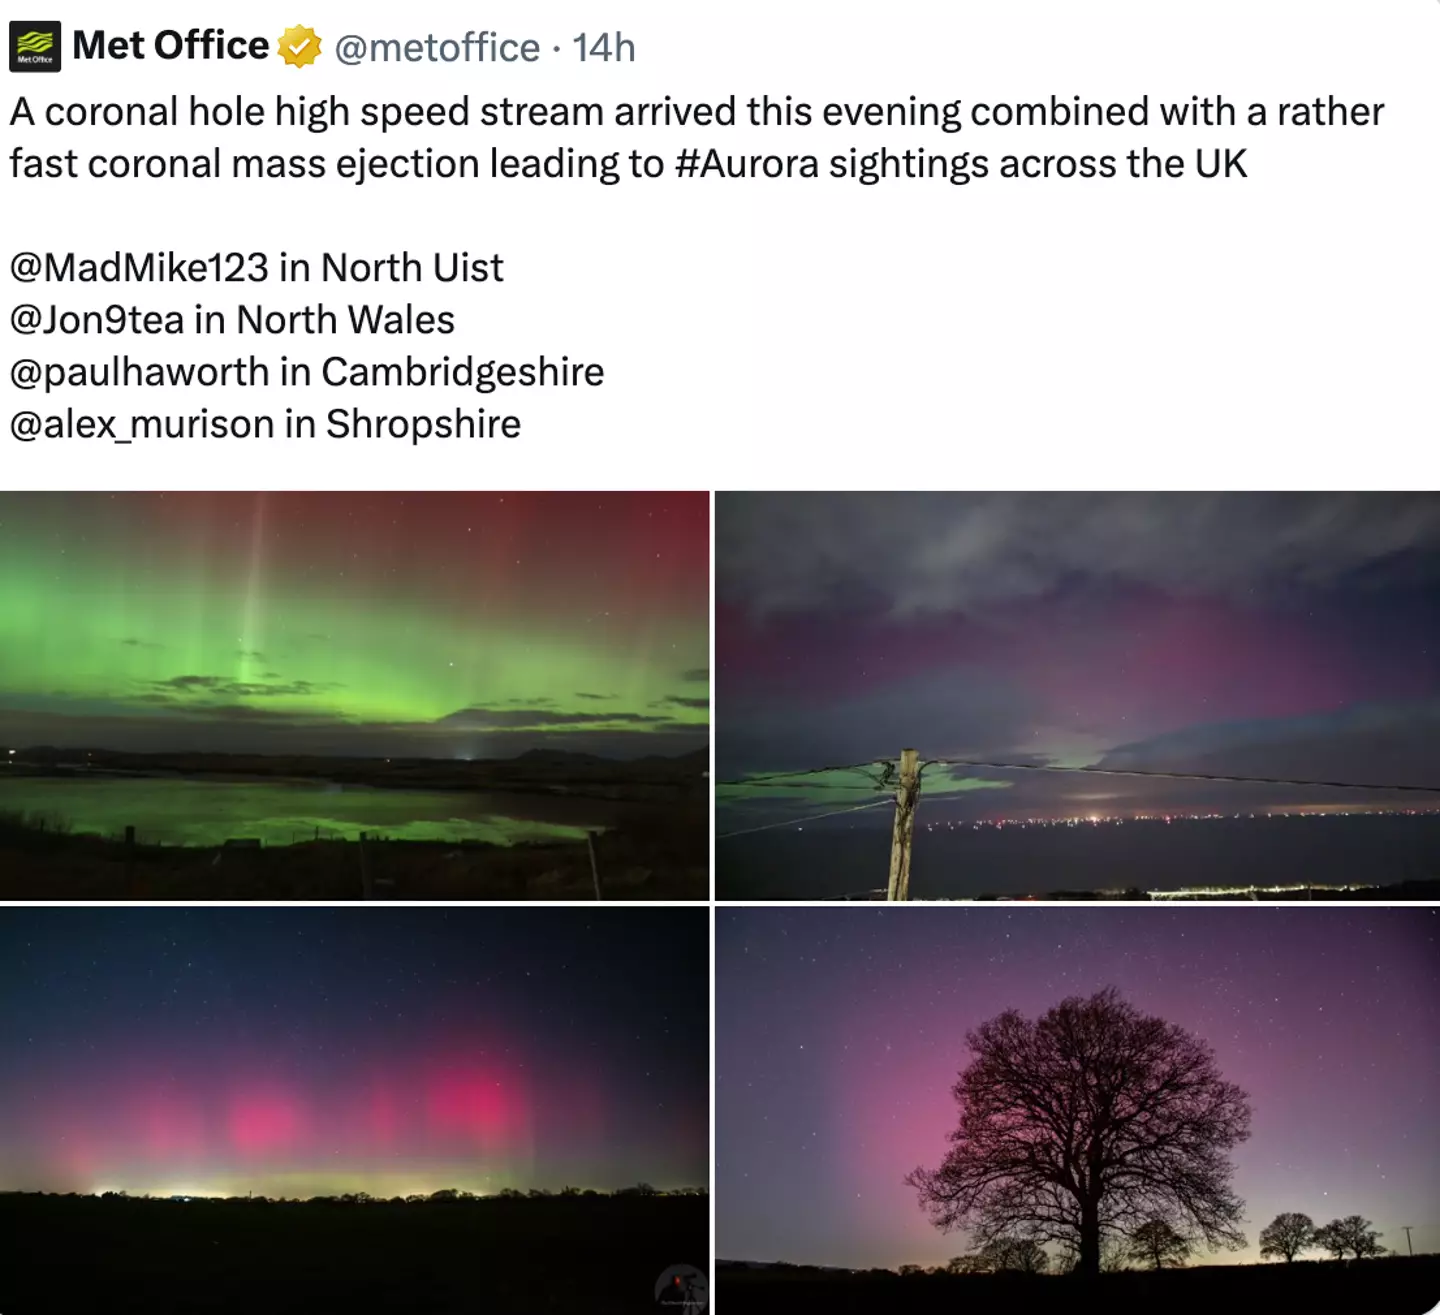 The lights were visible from across the UK on Sunday.